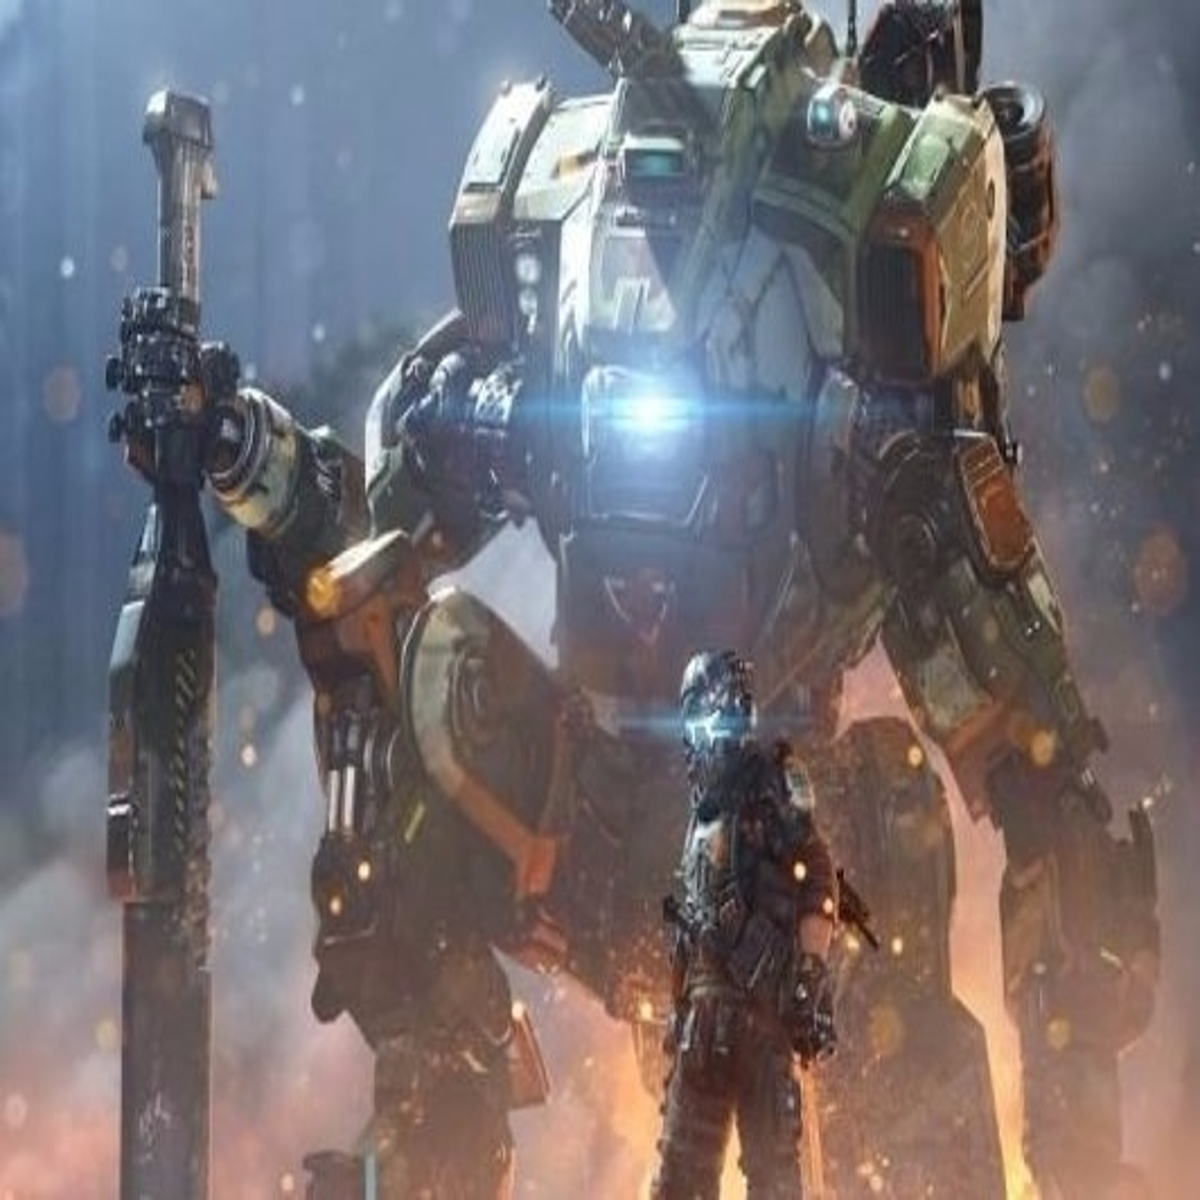 Where to play - largest remaining playerbase? - Titanfall 2